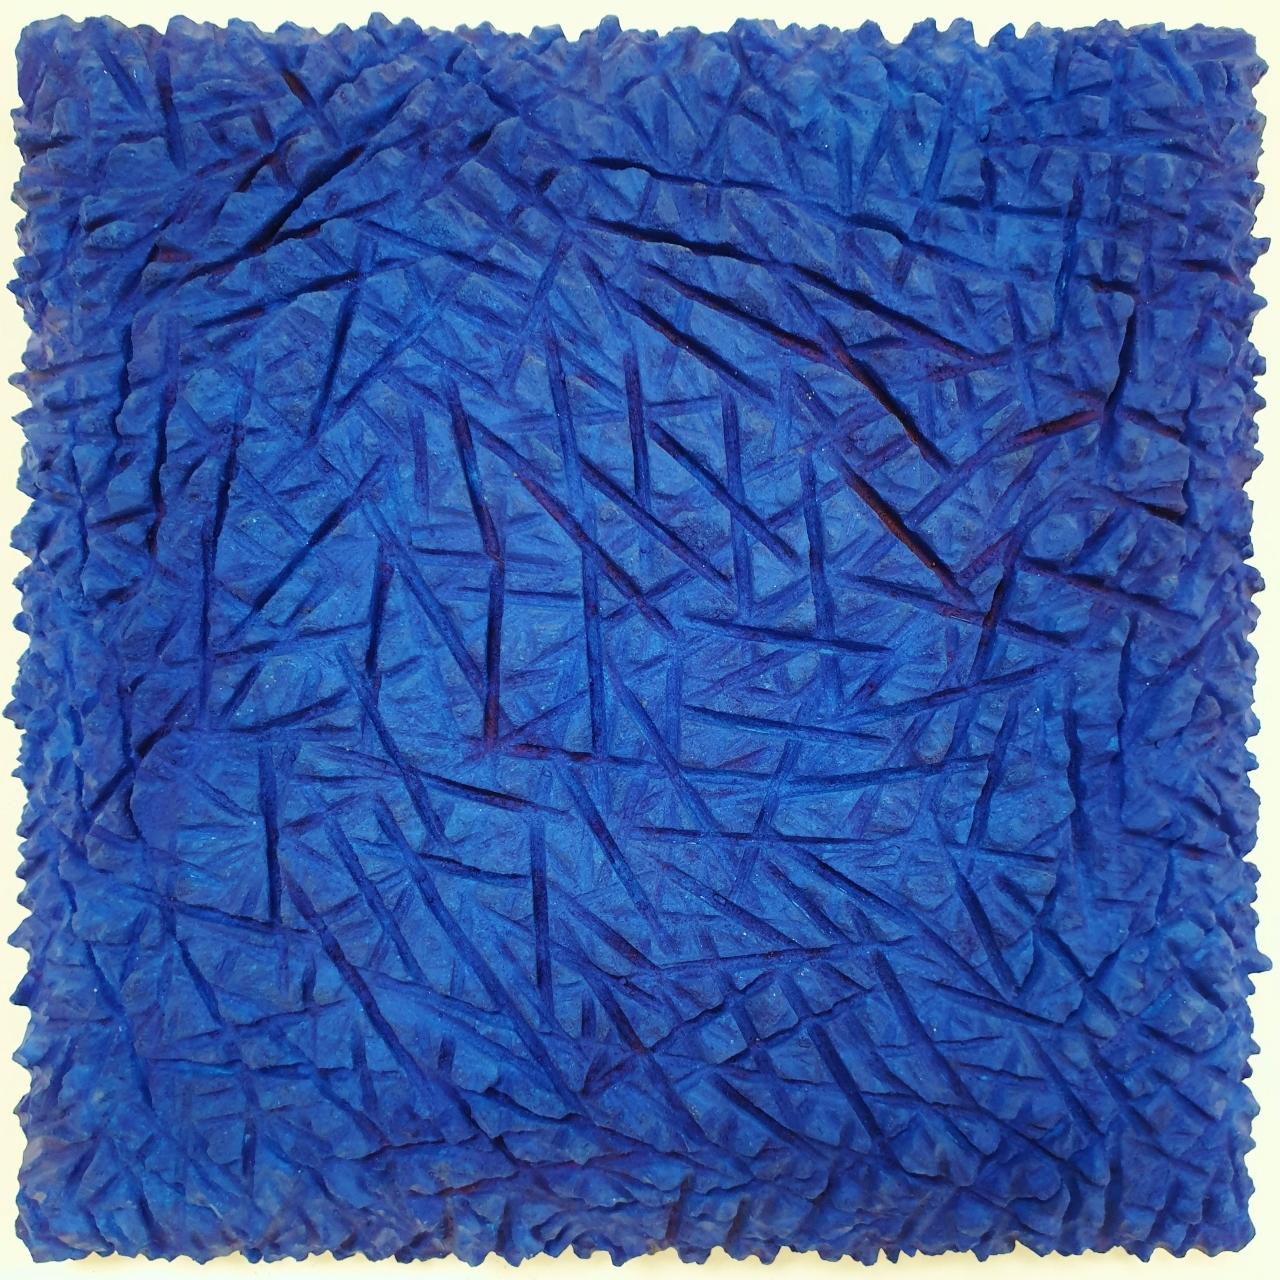 o.T. blau - contemporary modern abstract organic sculpture painting relief